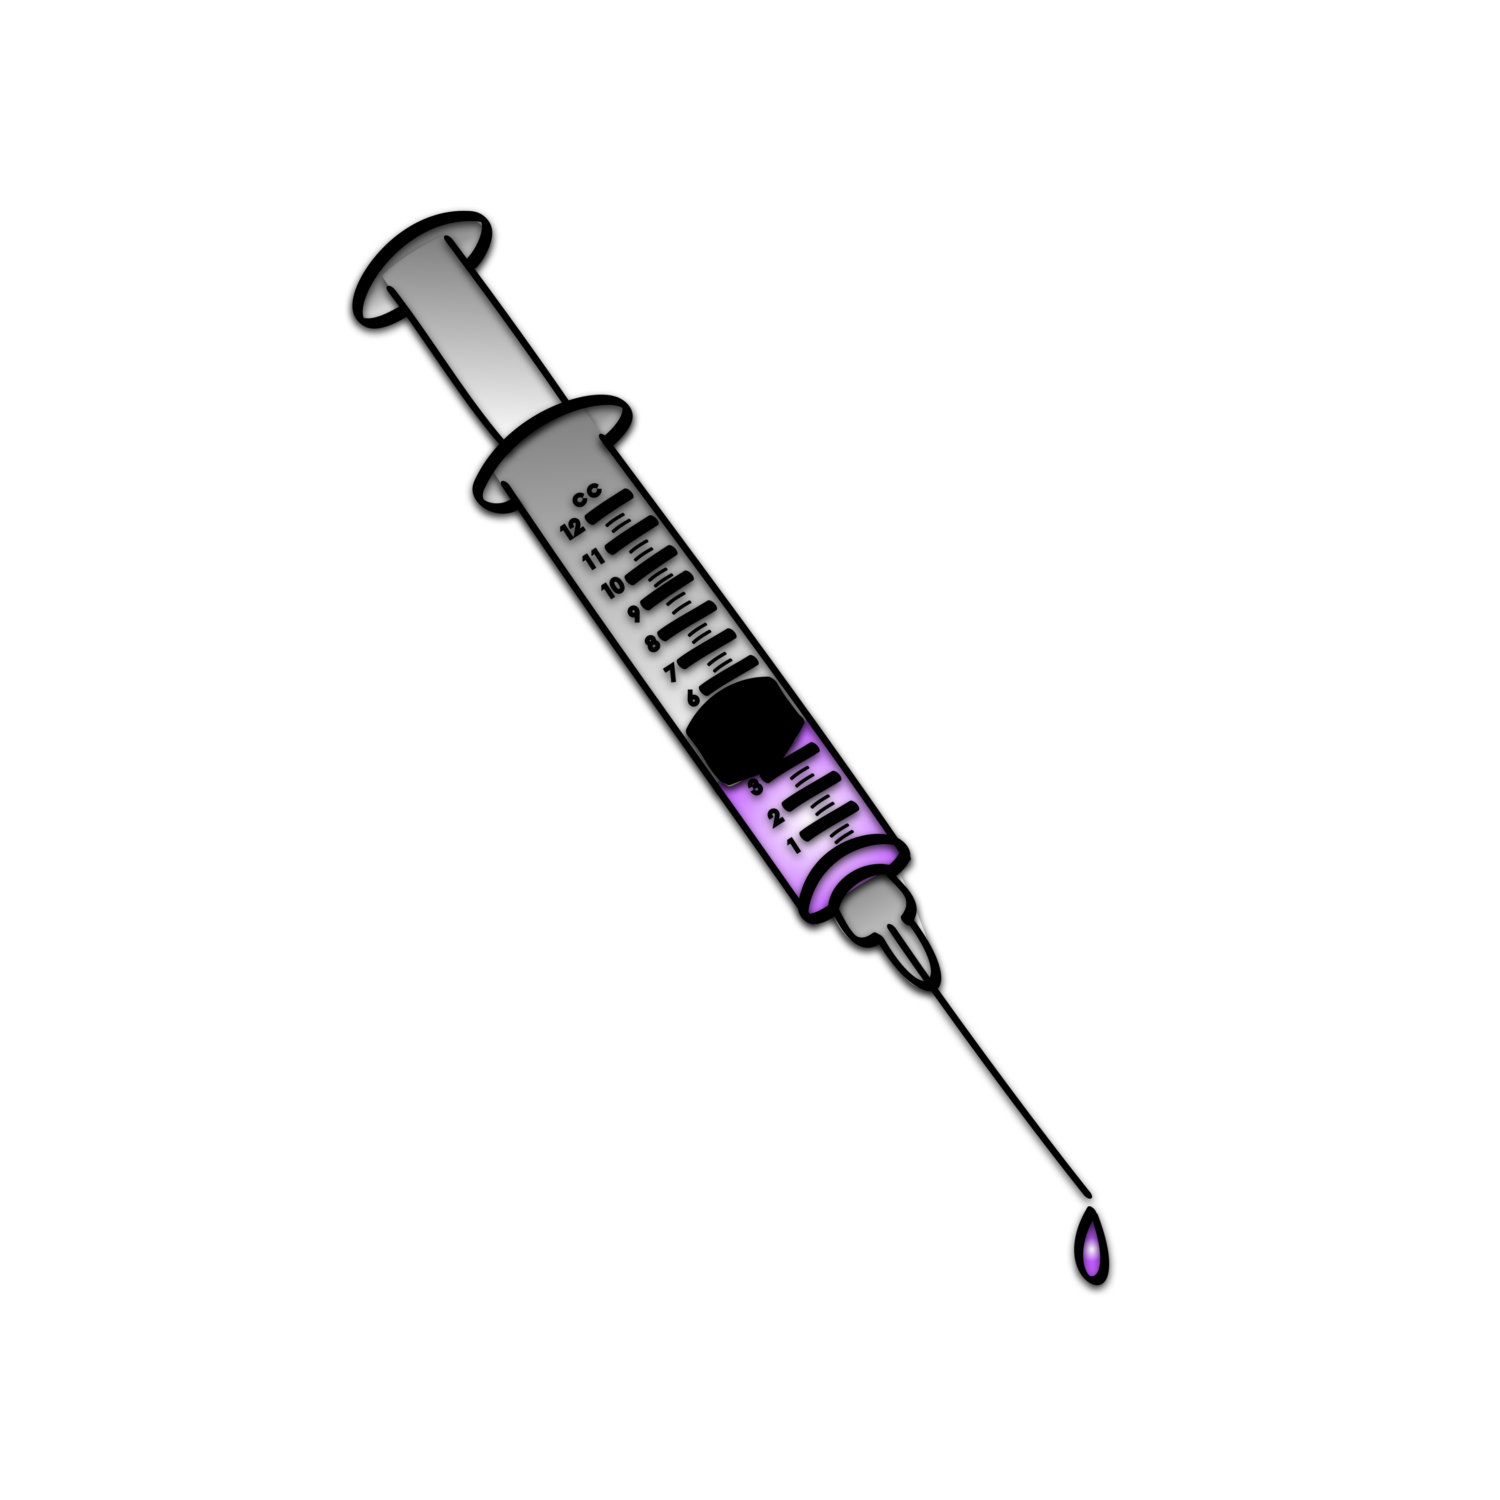 Needle Clipart Injection Clipart Vaccine Clipart By Fxdigital 